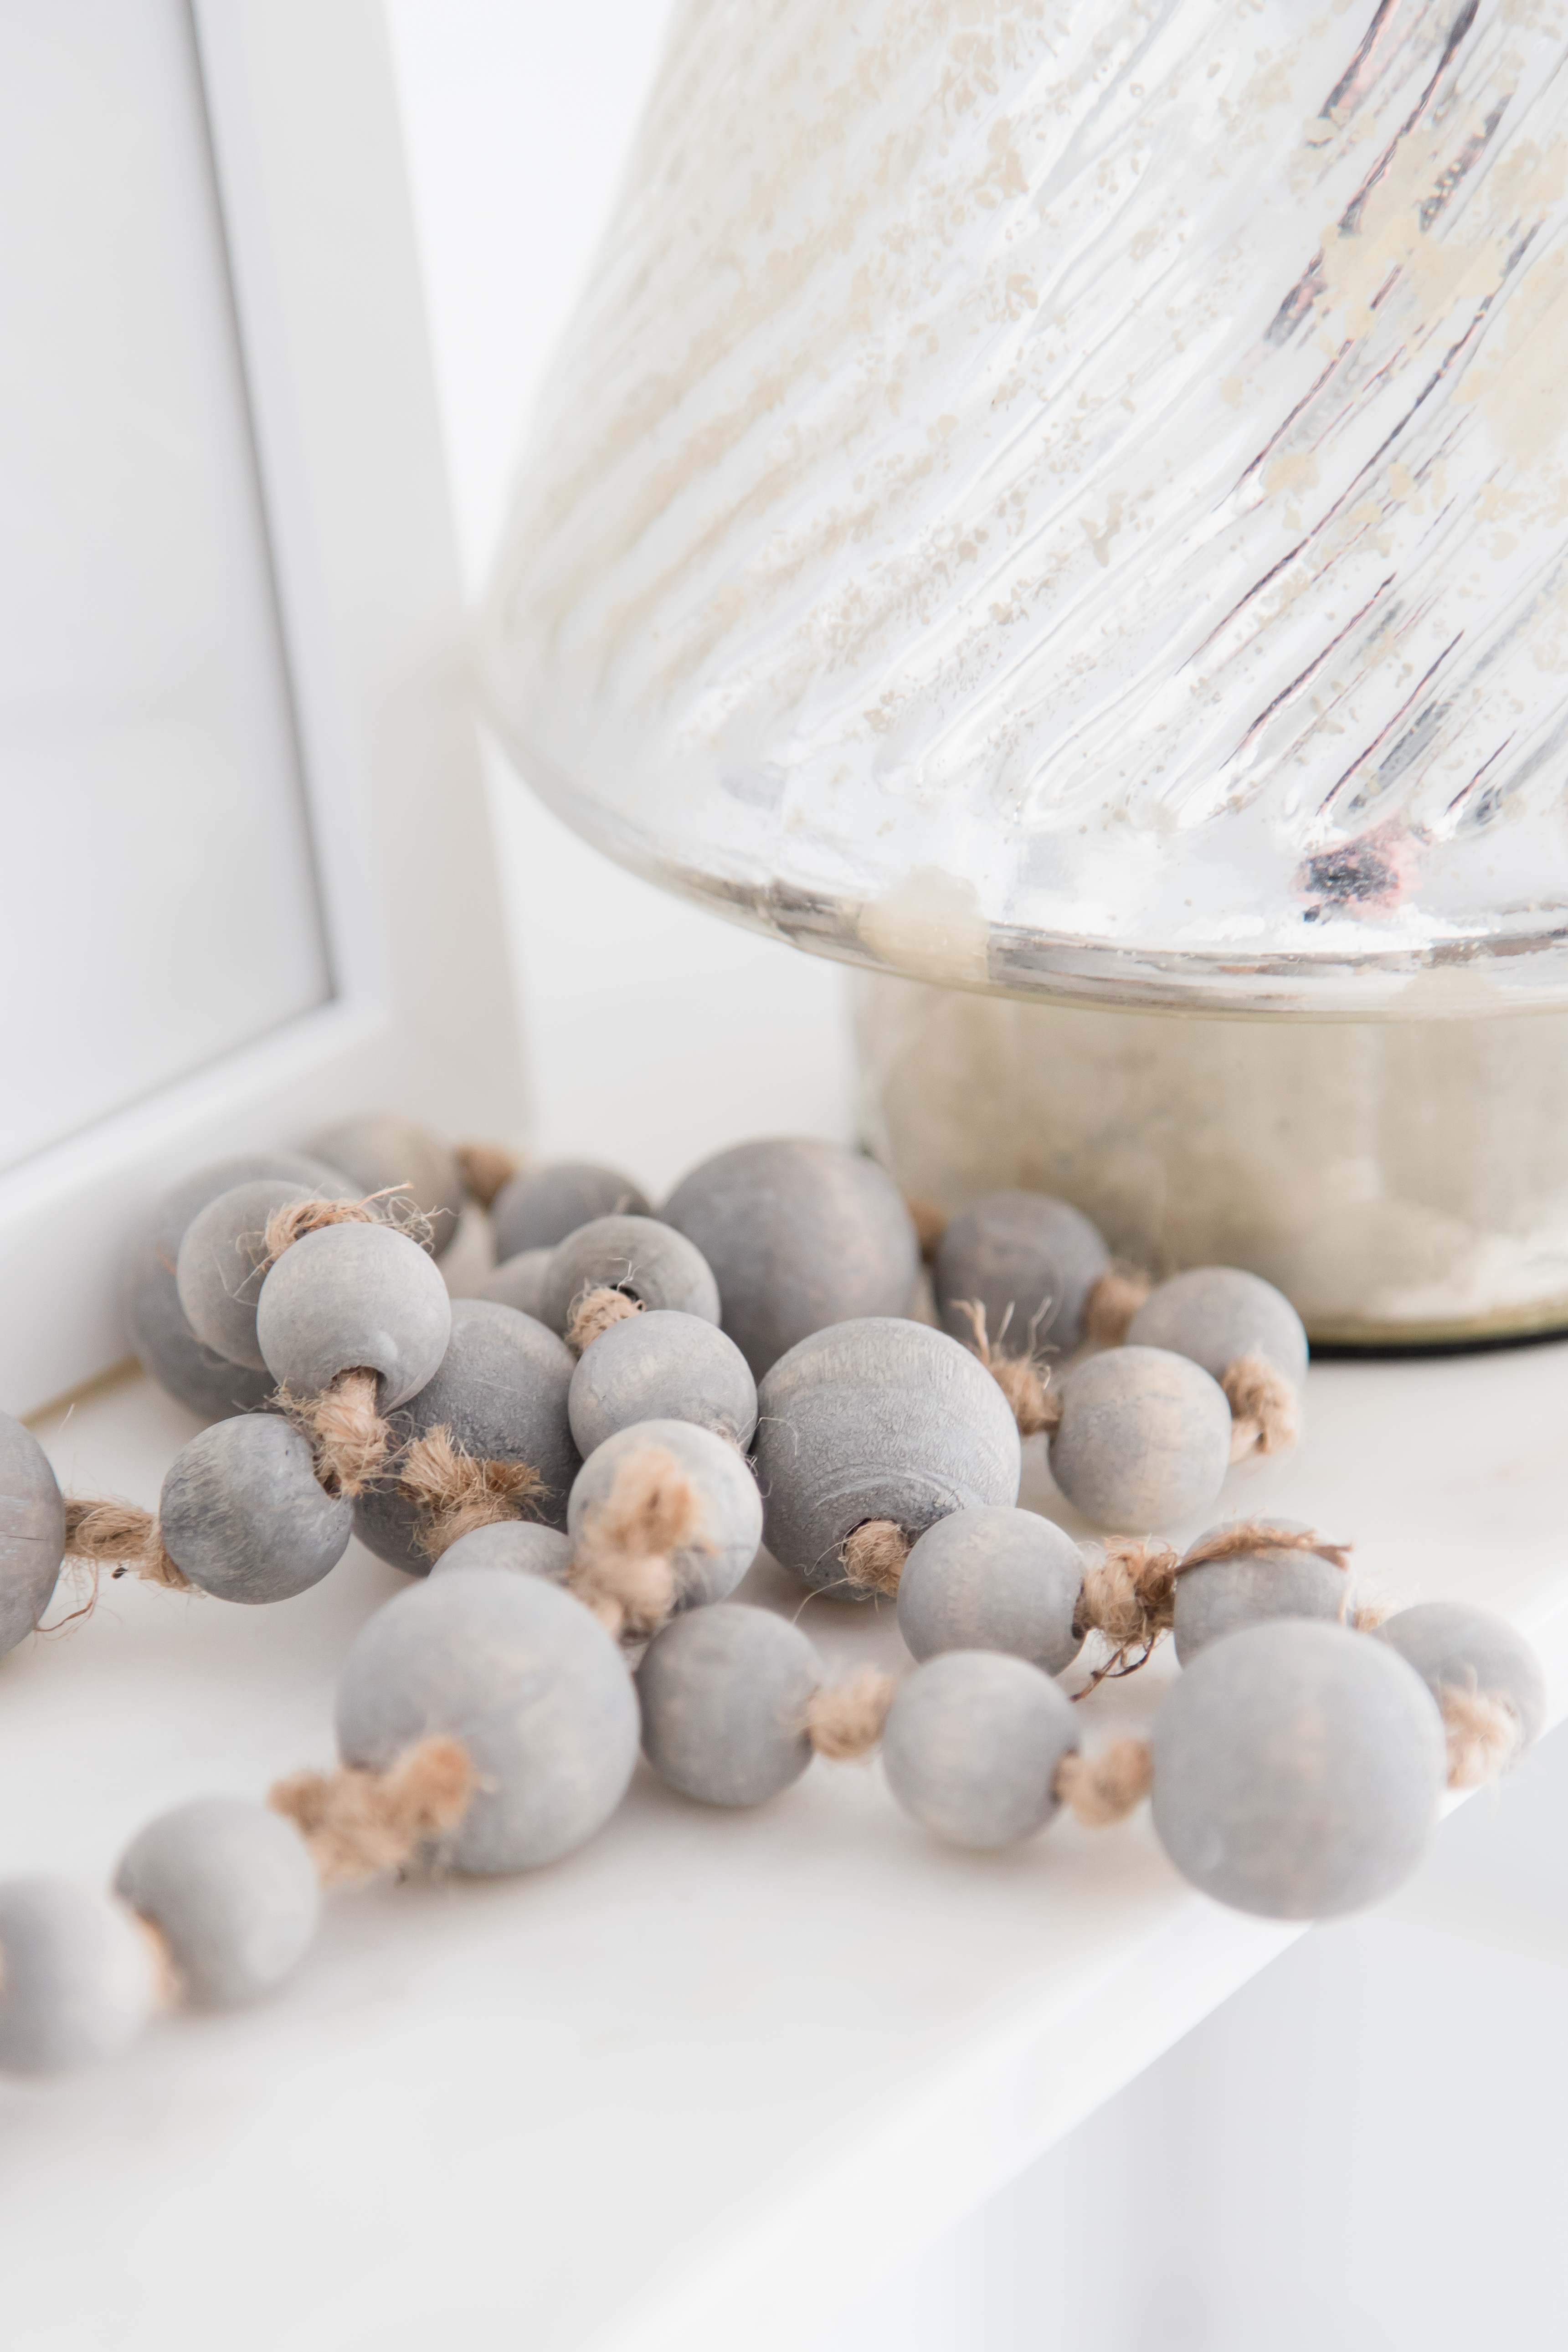 Gray wood beads | AE Home Style Life | Love the texture these beads add to kitchen decor. #graybeads #woodbeads #kitchendecor #whitekitchendecor #shelfdecor #graykitchen